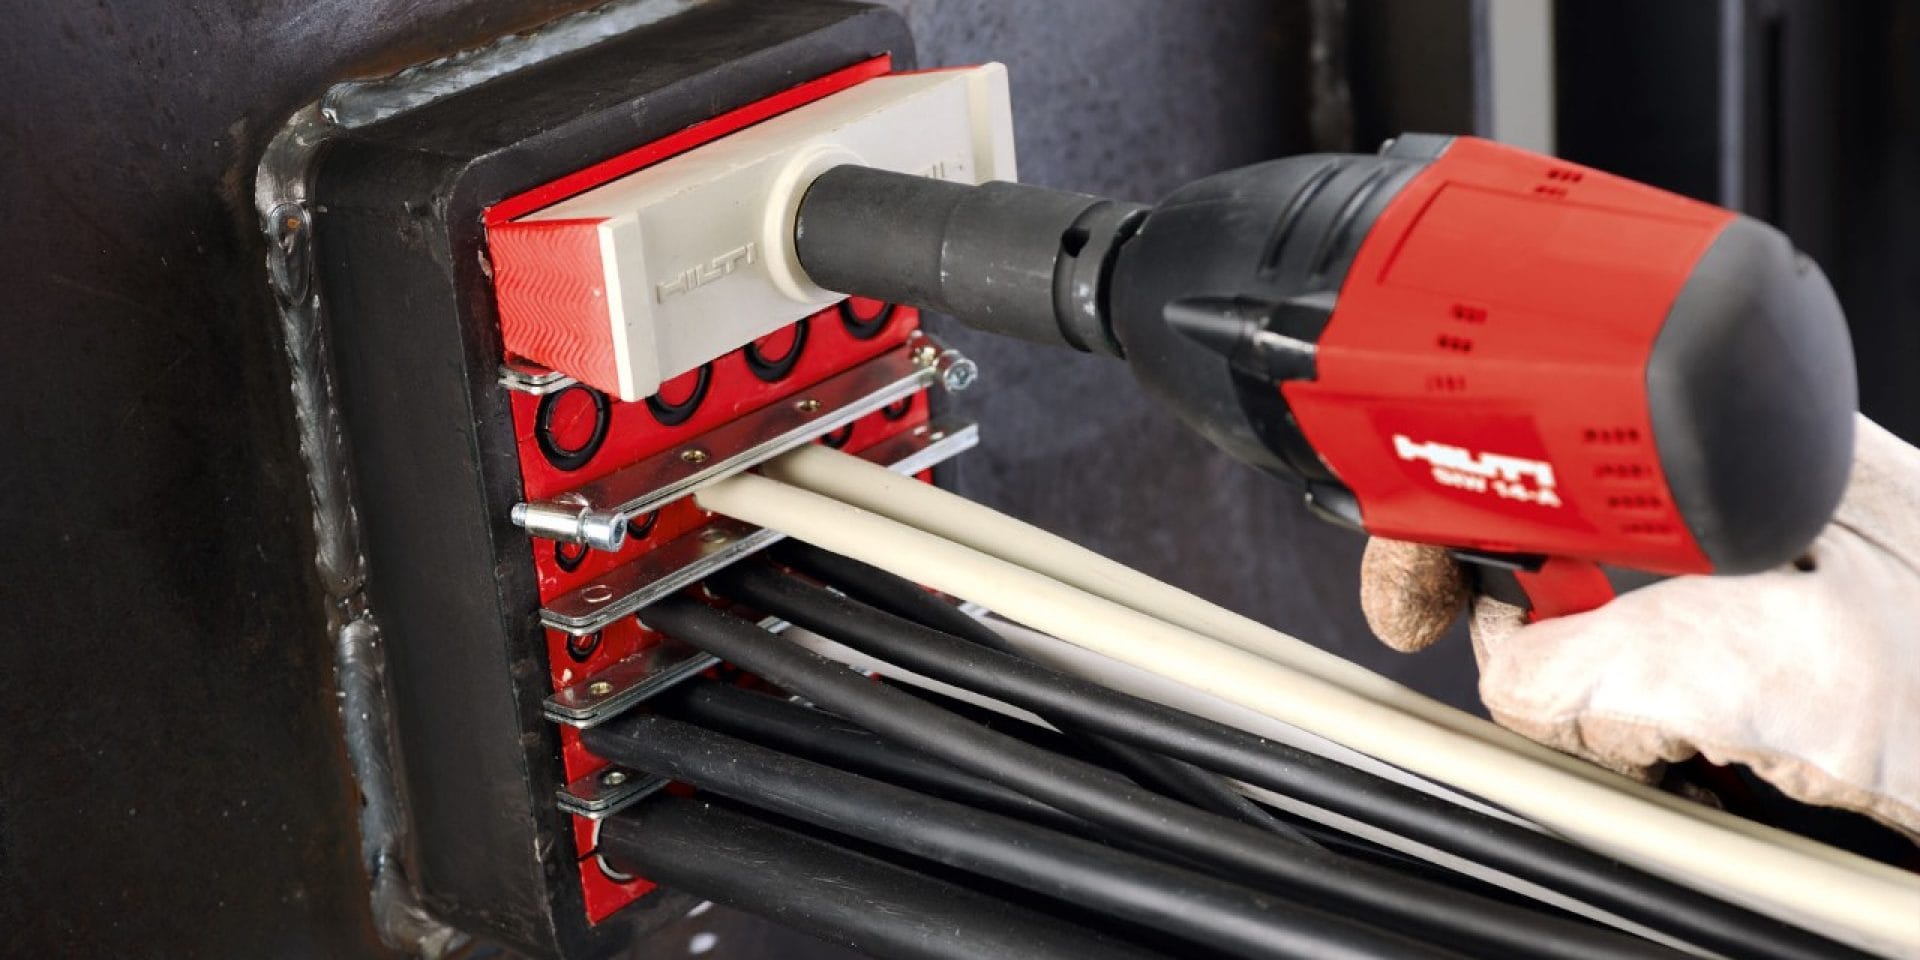 Hilti firestop for energy and industry